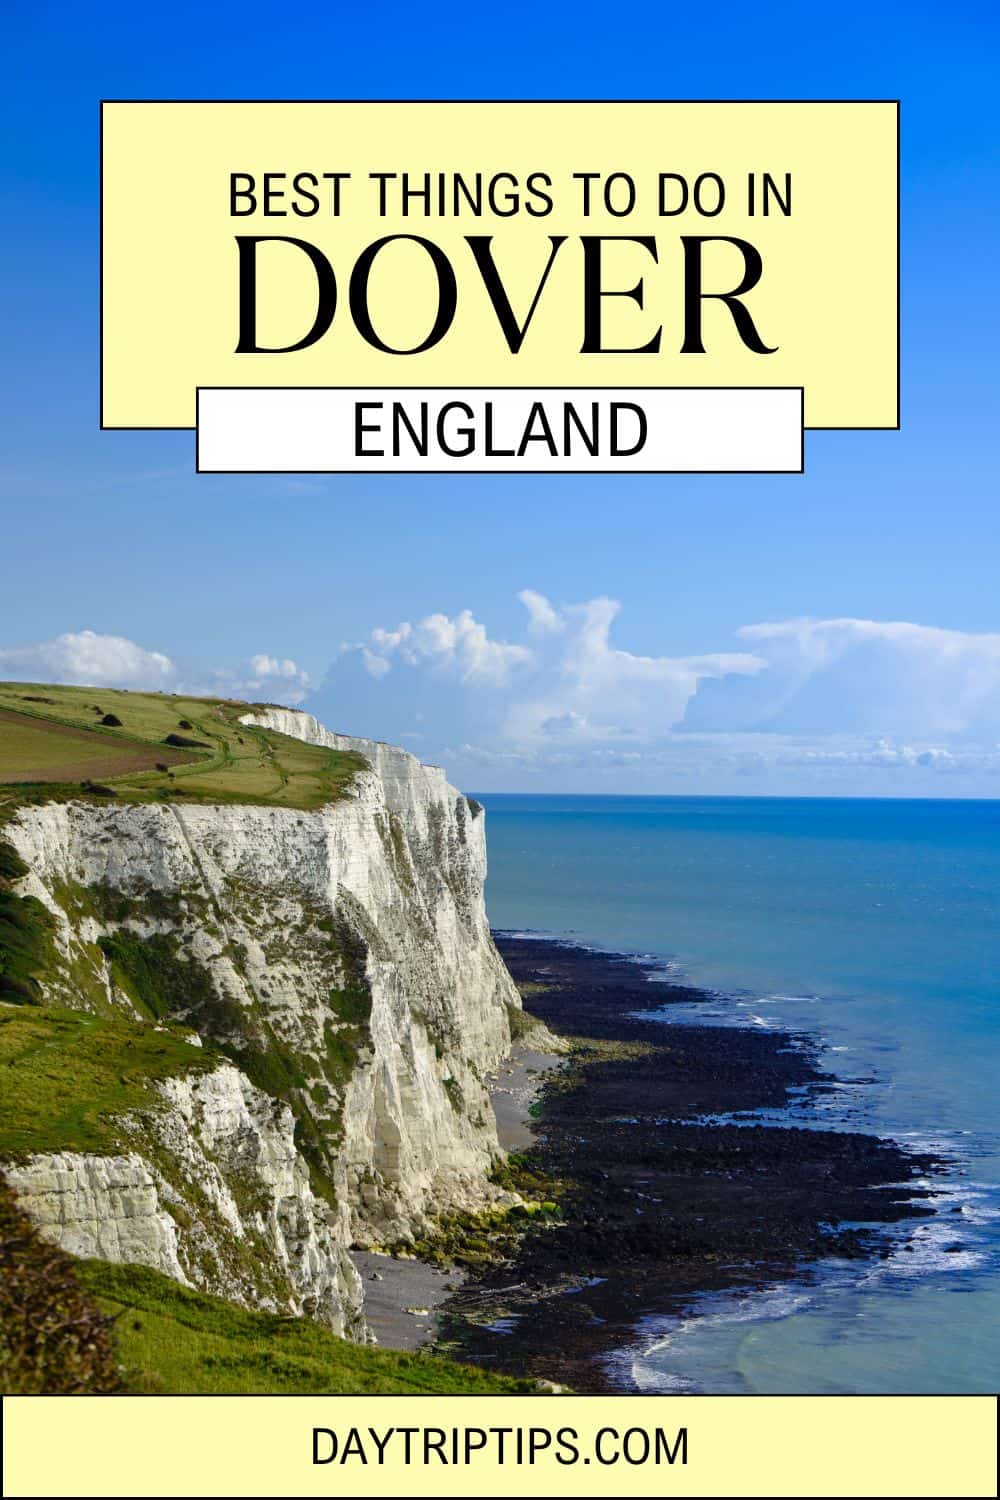 BEST Things to Do on a day trip to Dover